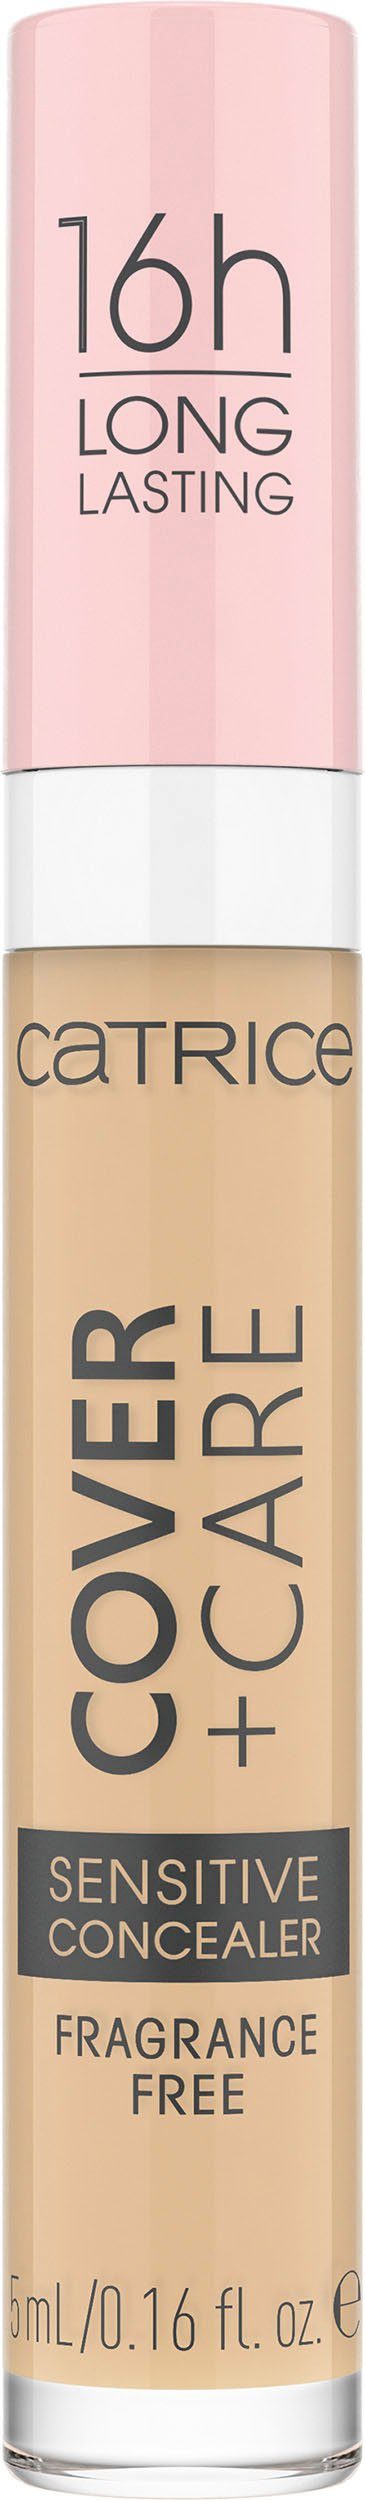 Catrice Concealer Catrice Cover Sensitive Concealer, 3-tlg. + Care nude 008W